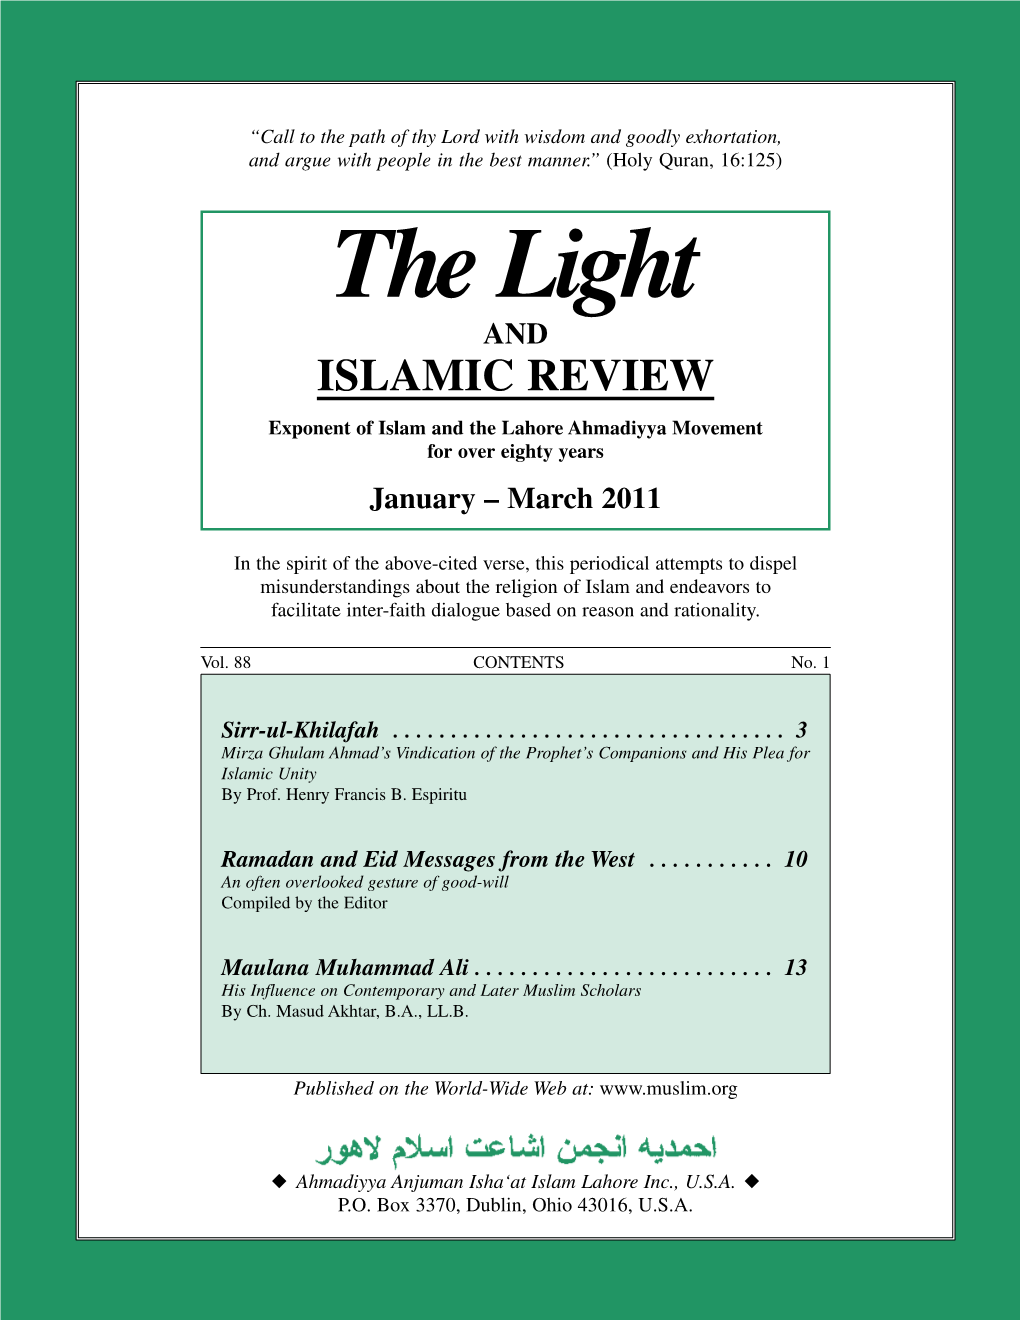 Light and ISLAMIC REVIEW Exponent of Islam and the Lahore Ahmadiyya Movement for Over Eighty Years January – March 2011